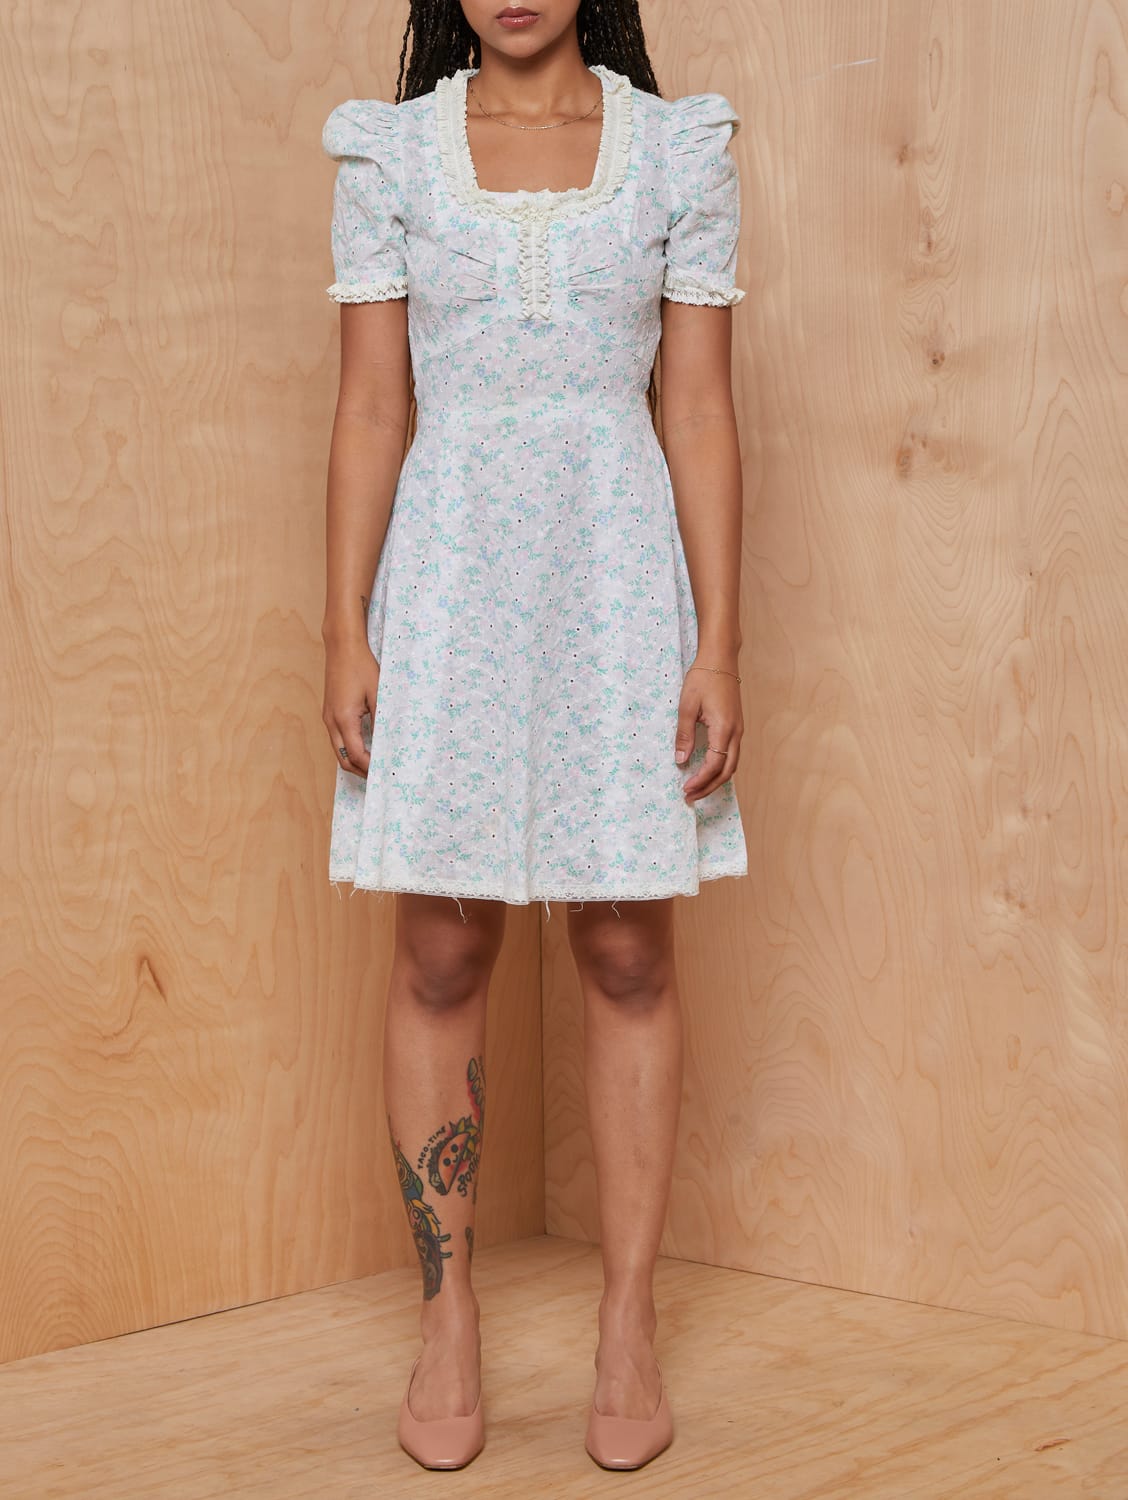 Vintage Ivory and Pastel Floral Eyelet Dolly Dress